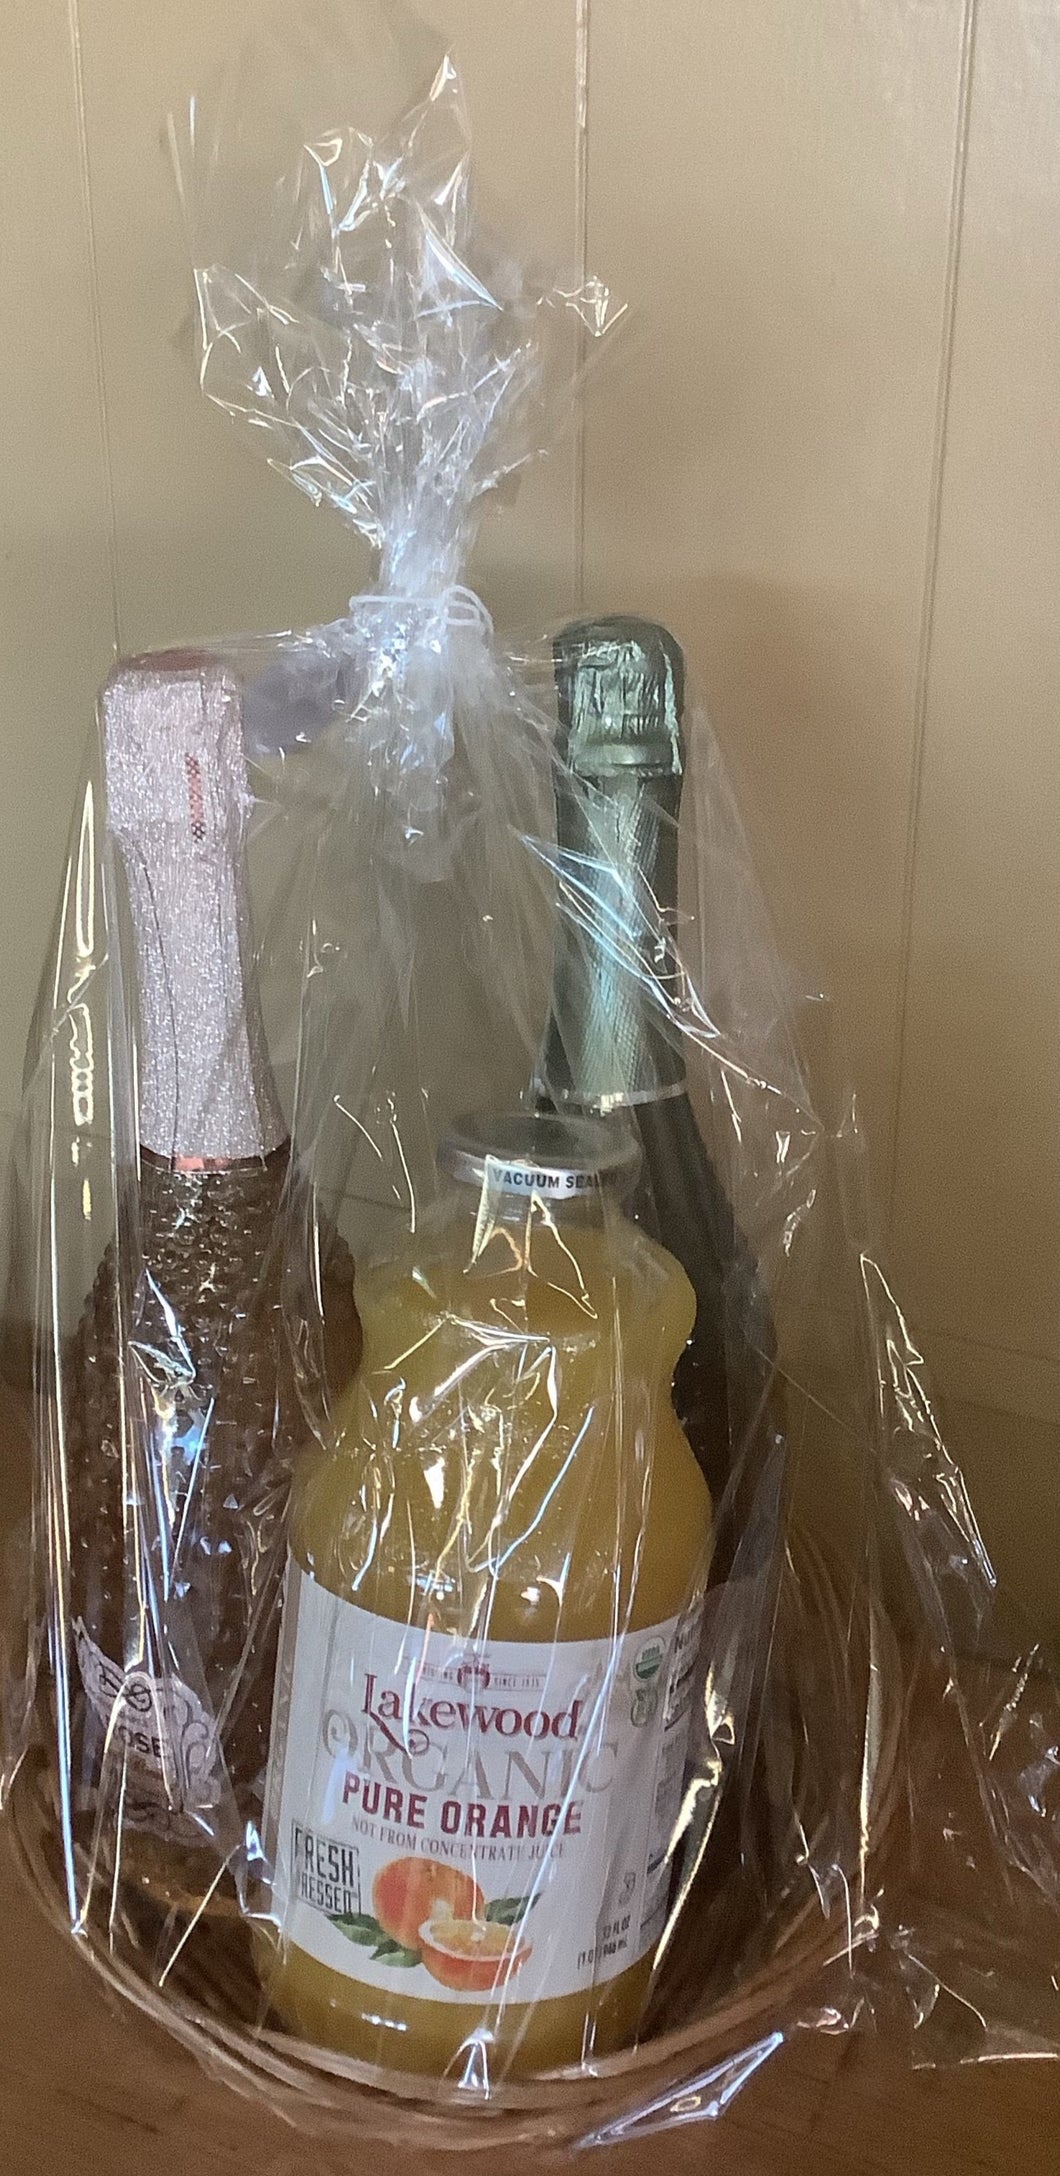 Mimosa with Orange Juice Gift Basket! – The Downtown Farm Stand